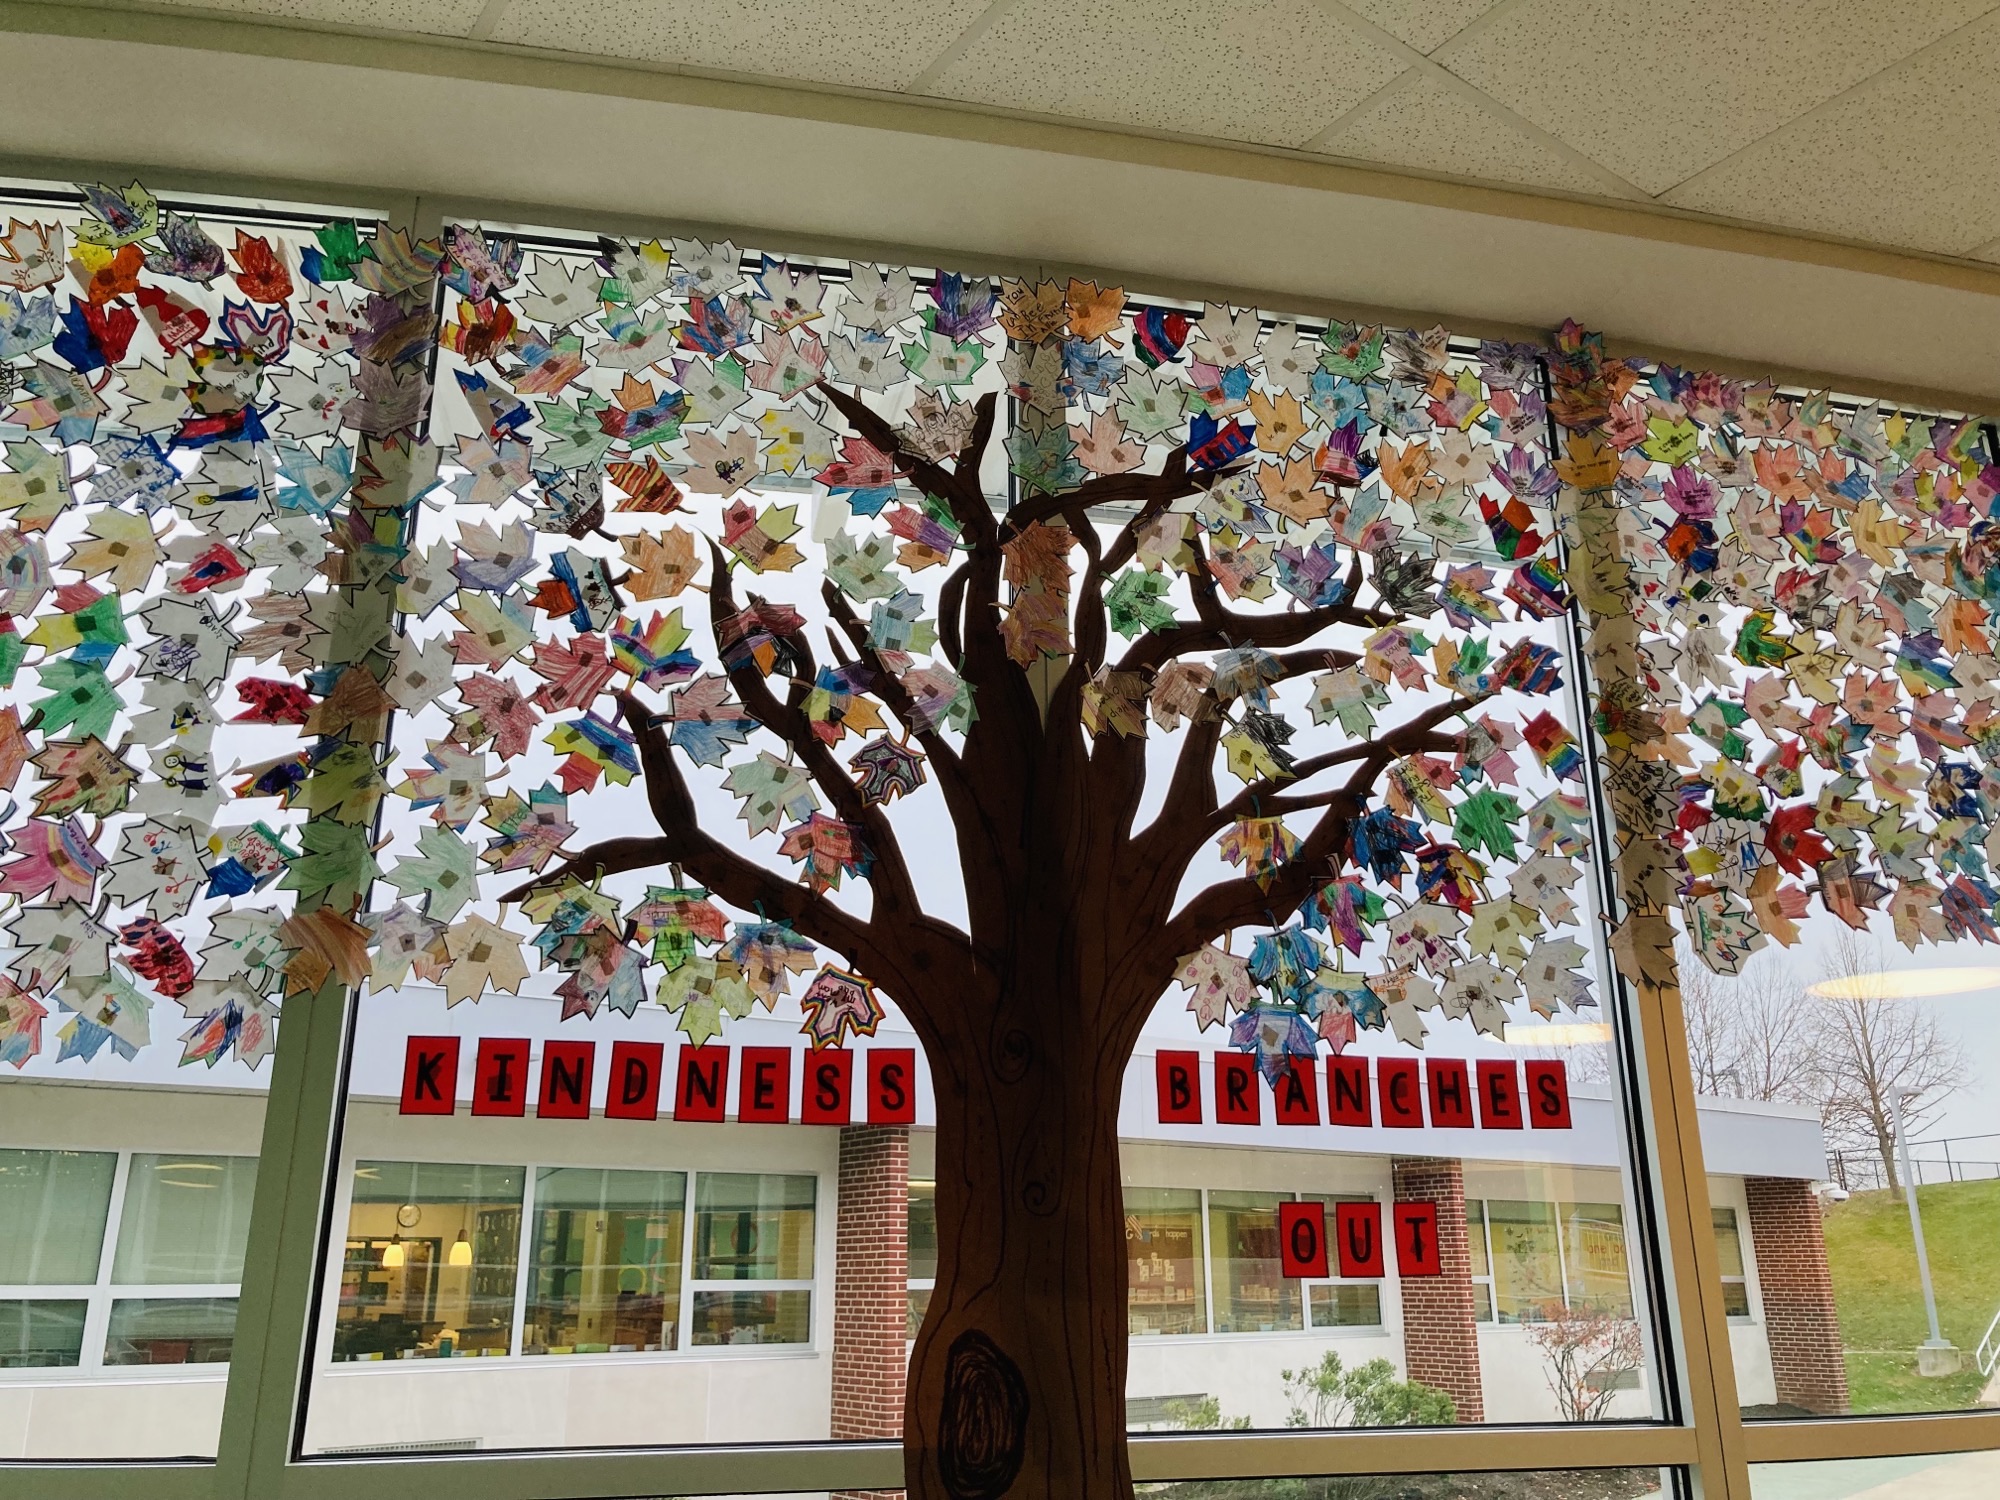 Kindness Branches Out at SAES for World Kindness Day!